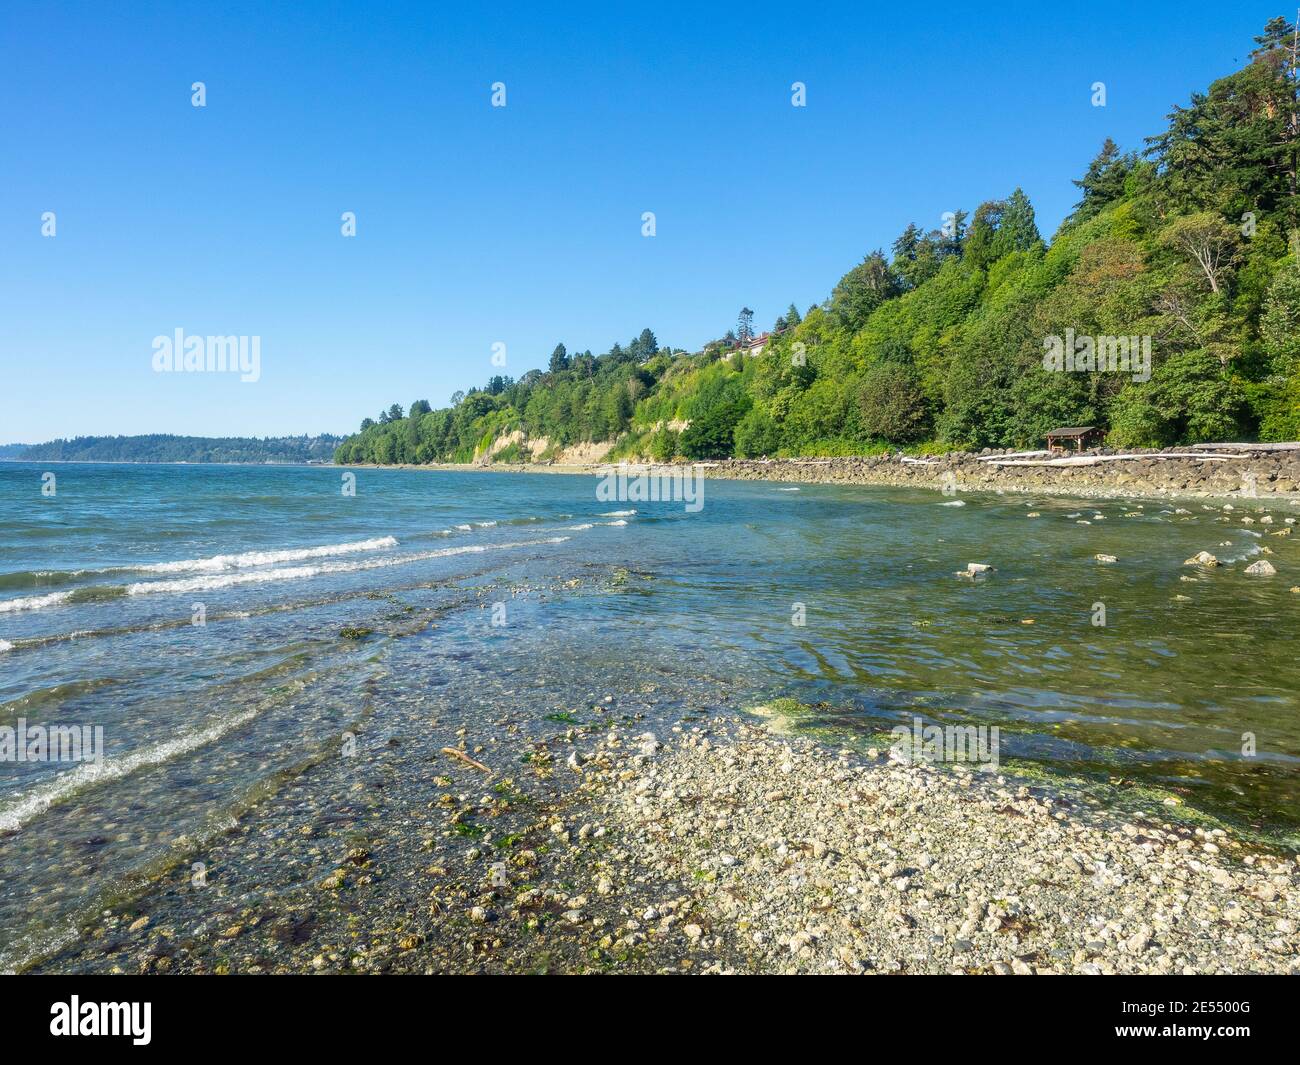 Saltwater State Park is a plot of second-growth timber on Puget Sound in the city of Des Moines, Washington, United States. The main attraction is sal Stock Photo